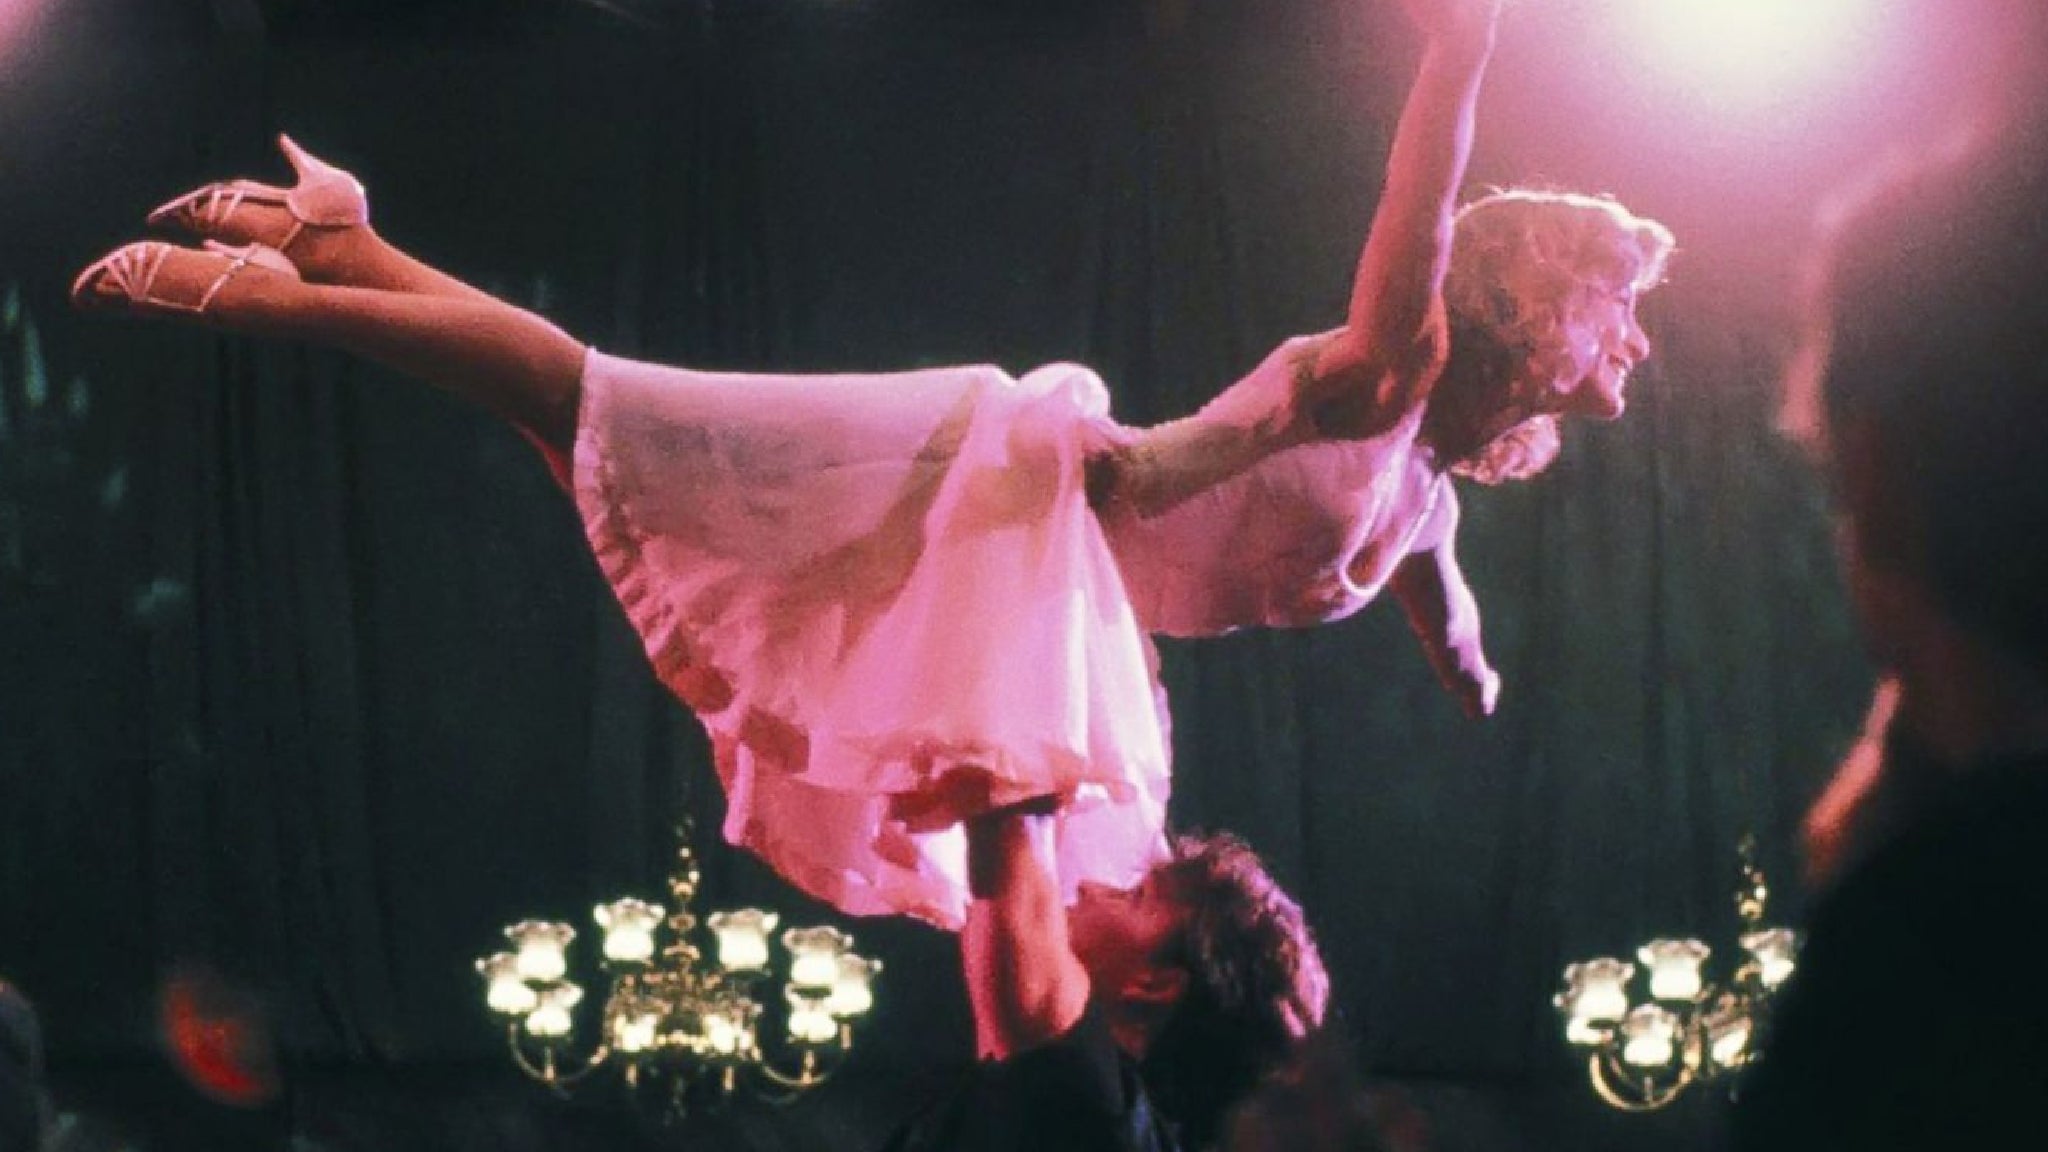 Dirty Dancing - 1987 Film in Kalamazoo promo photo for $4 For The 4th Special  presale offer code